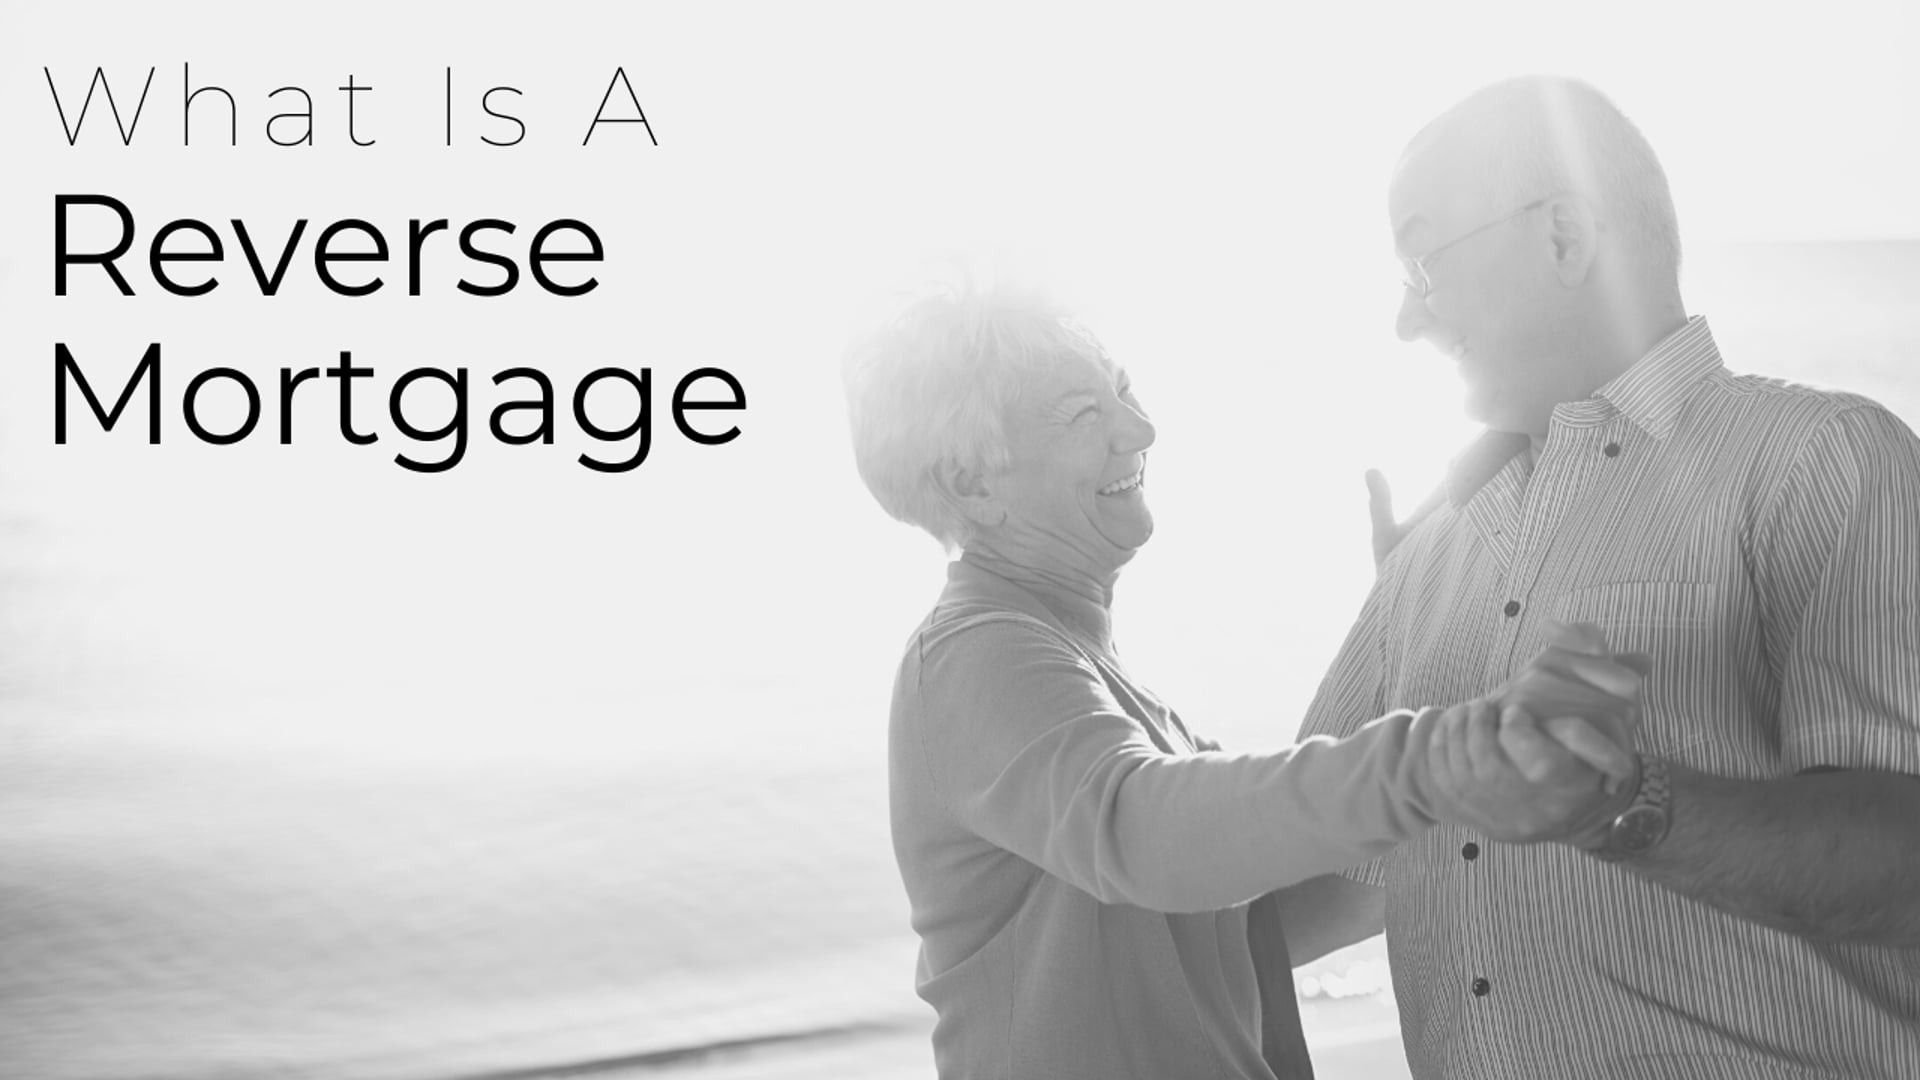 reverse mortgage introduction video